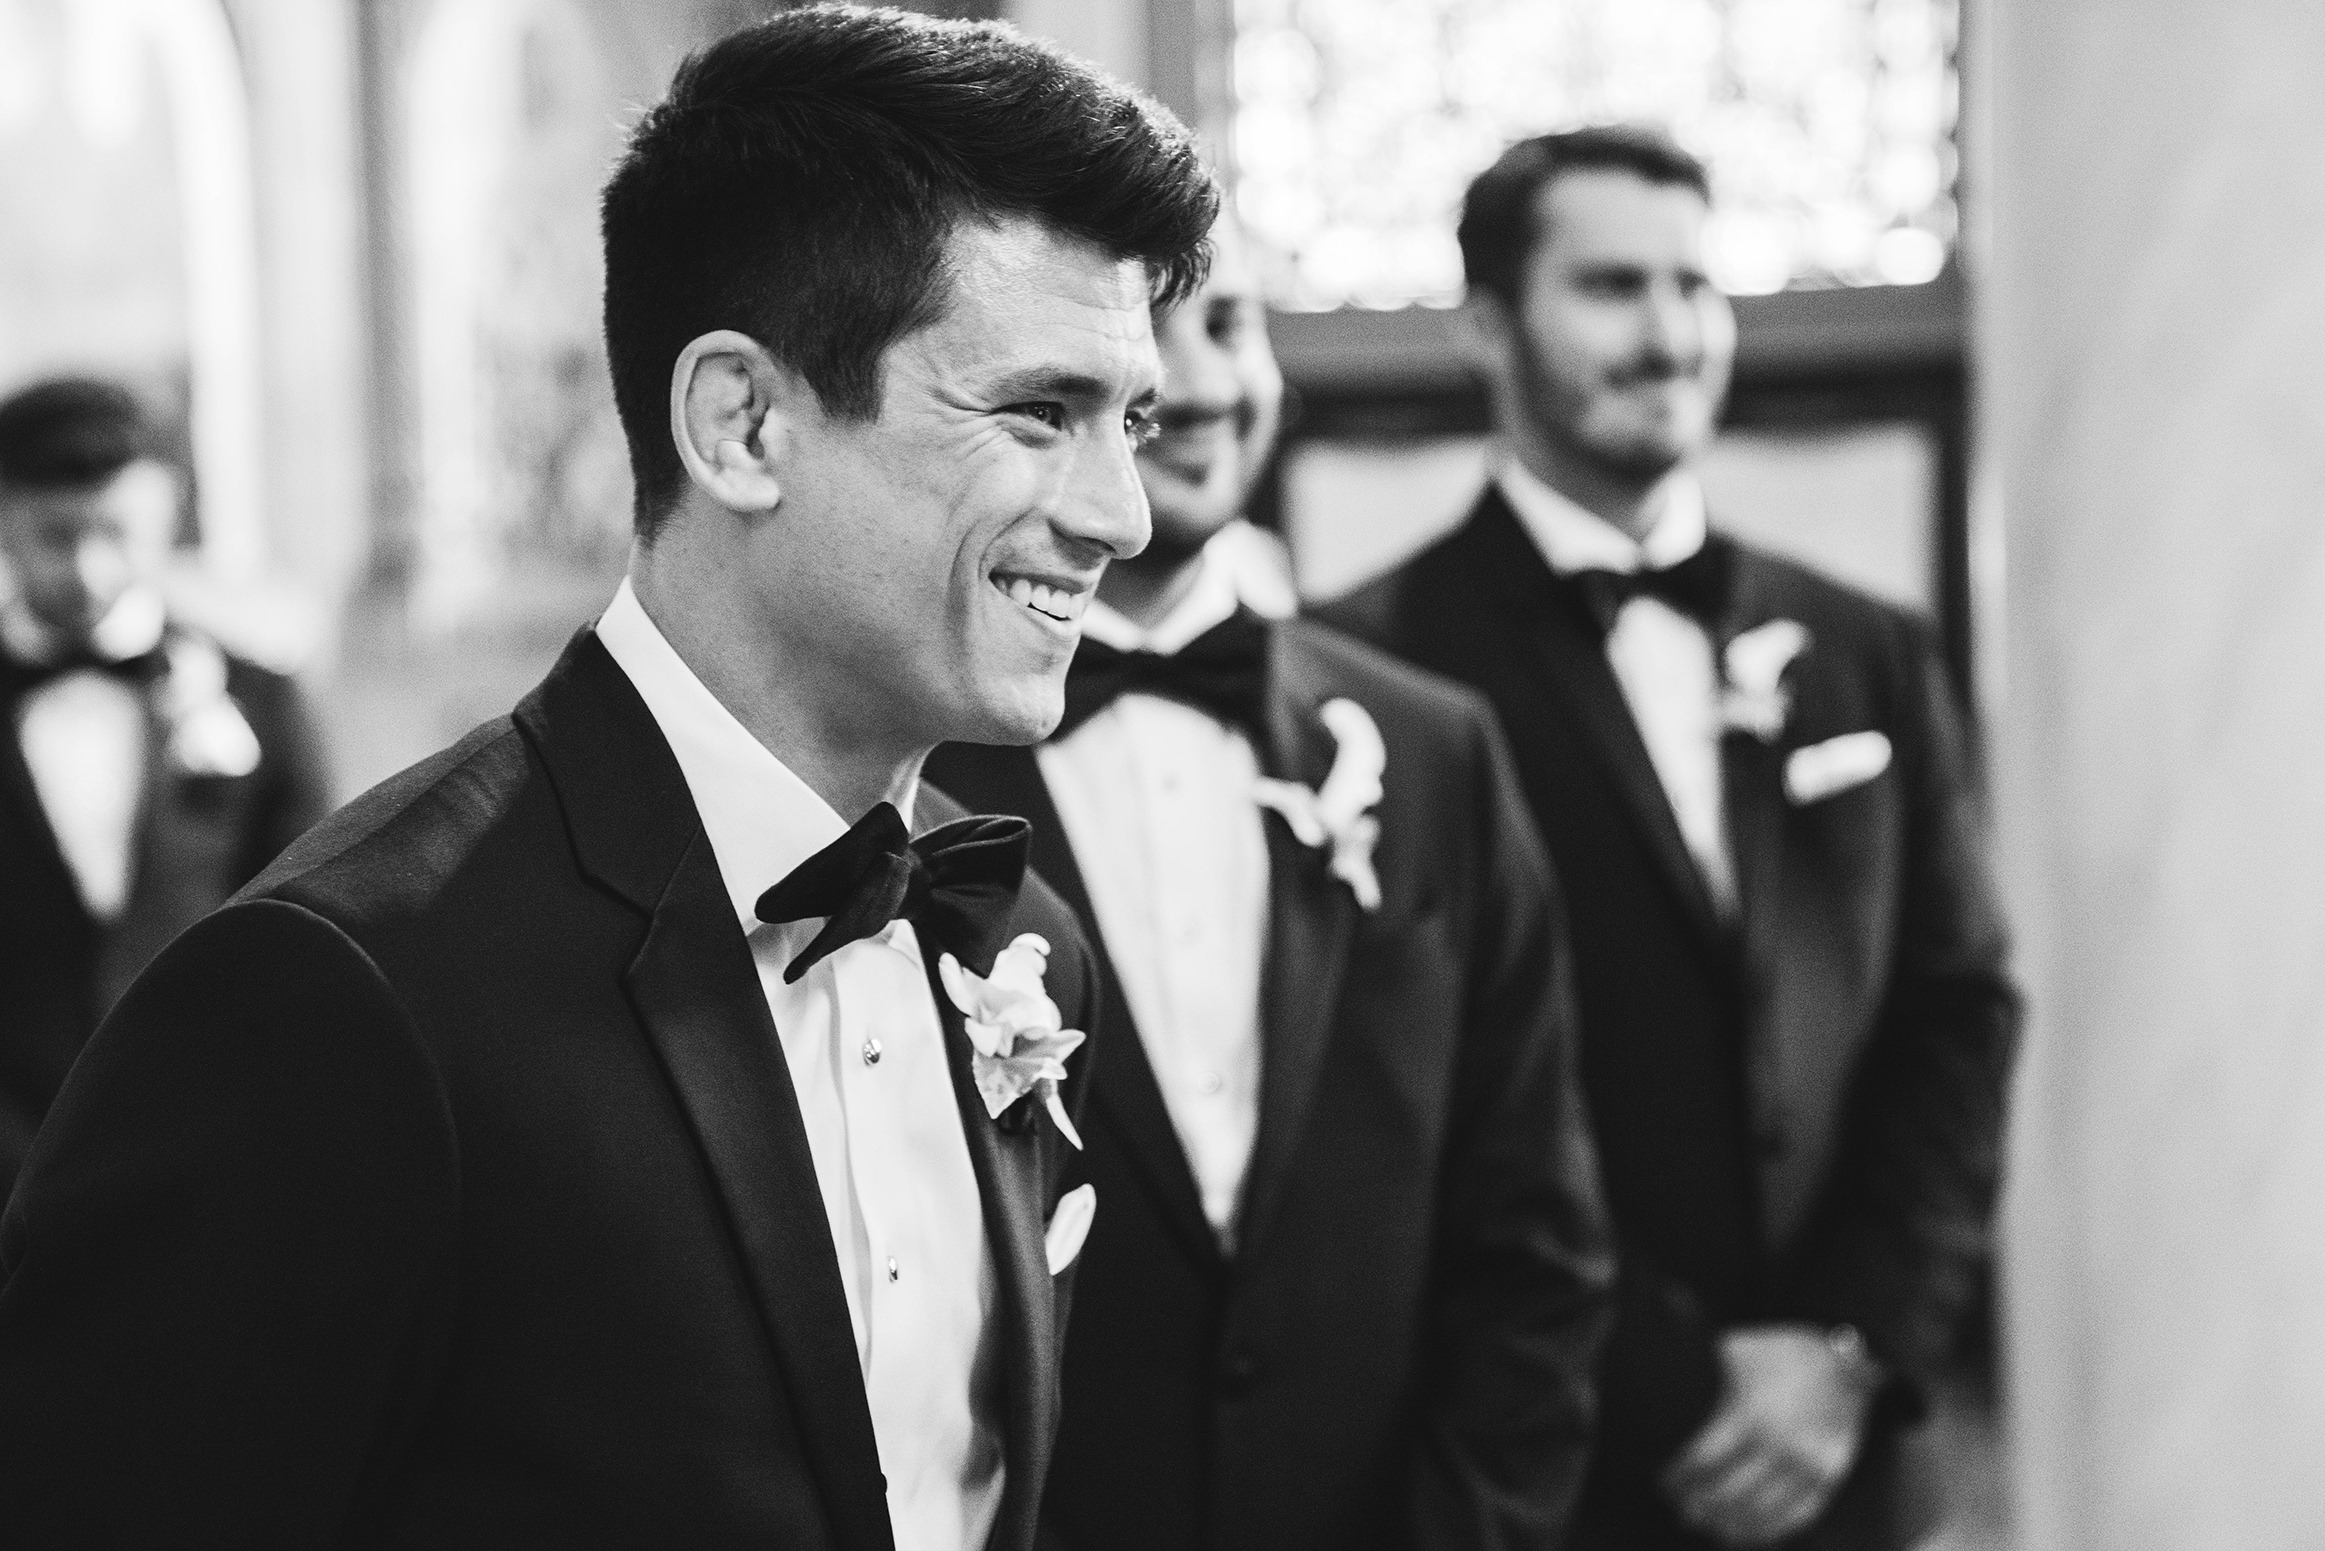 A documentary photograph featured in the best of wedding photography of 2019 showing a groom smiling as his bride walks up the aisle for their ceremony